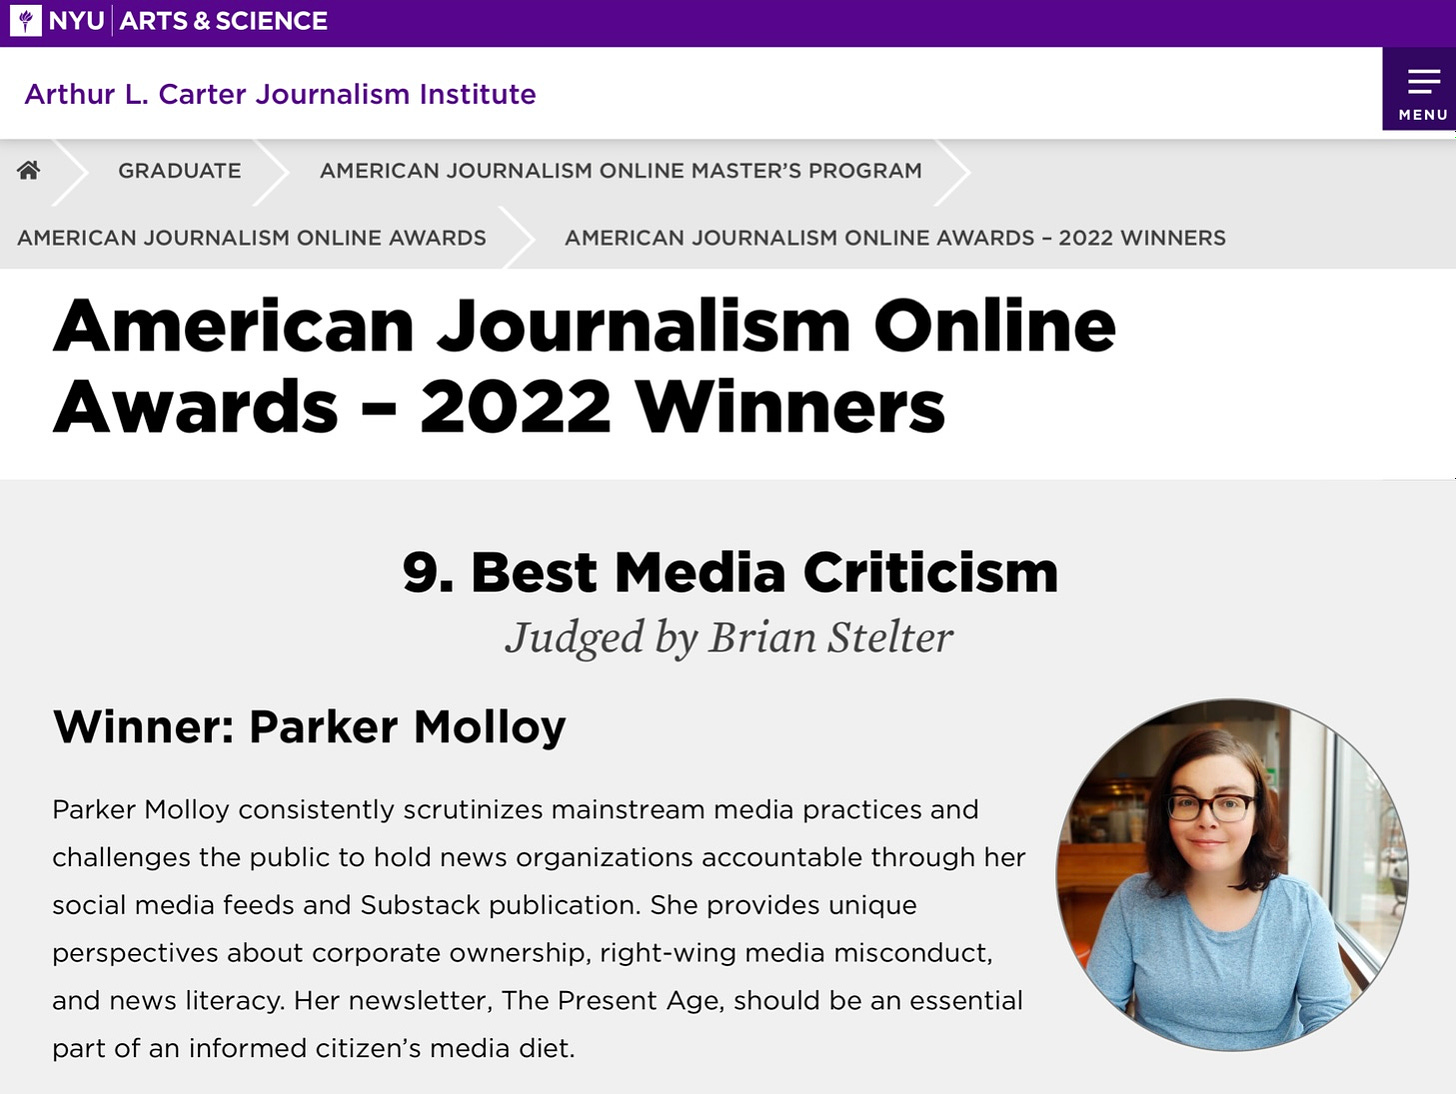 "Parker Molloy consistently scrutinizes mainstream media practices and challenges the public to hold news organizations accountable through her social media feeds and Substack publication. She provides unique perspectives about corporate ownership, right-wing media misconduct, and news literacy. Her newsletter, The Present Age, should be an essential part of an informed citizen’s media diet."